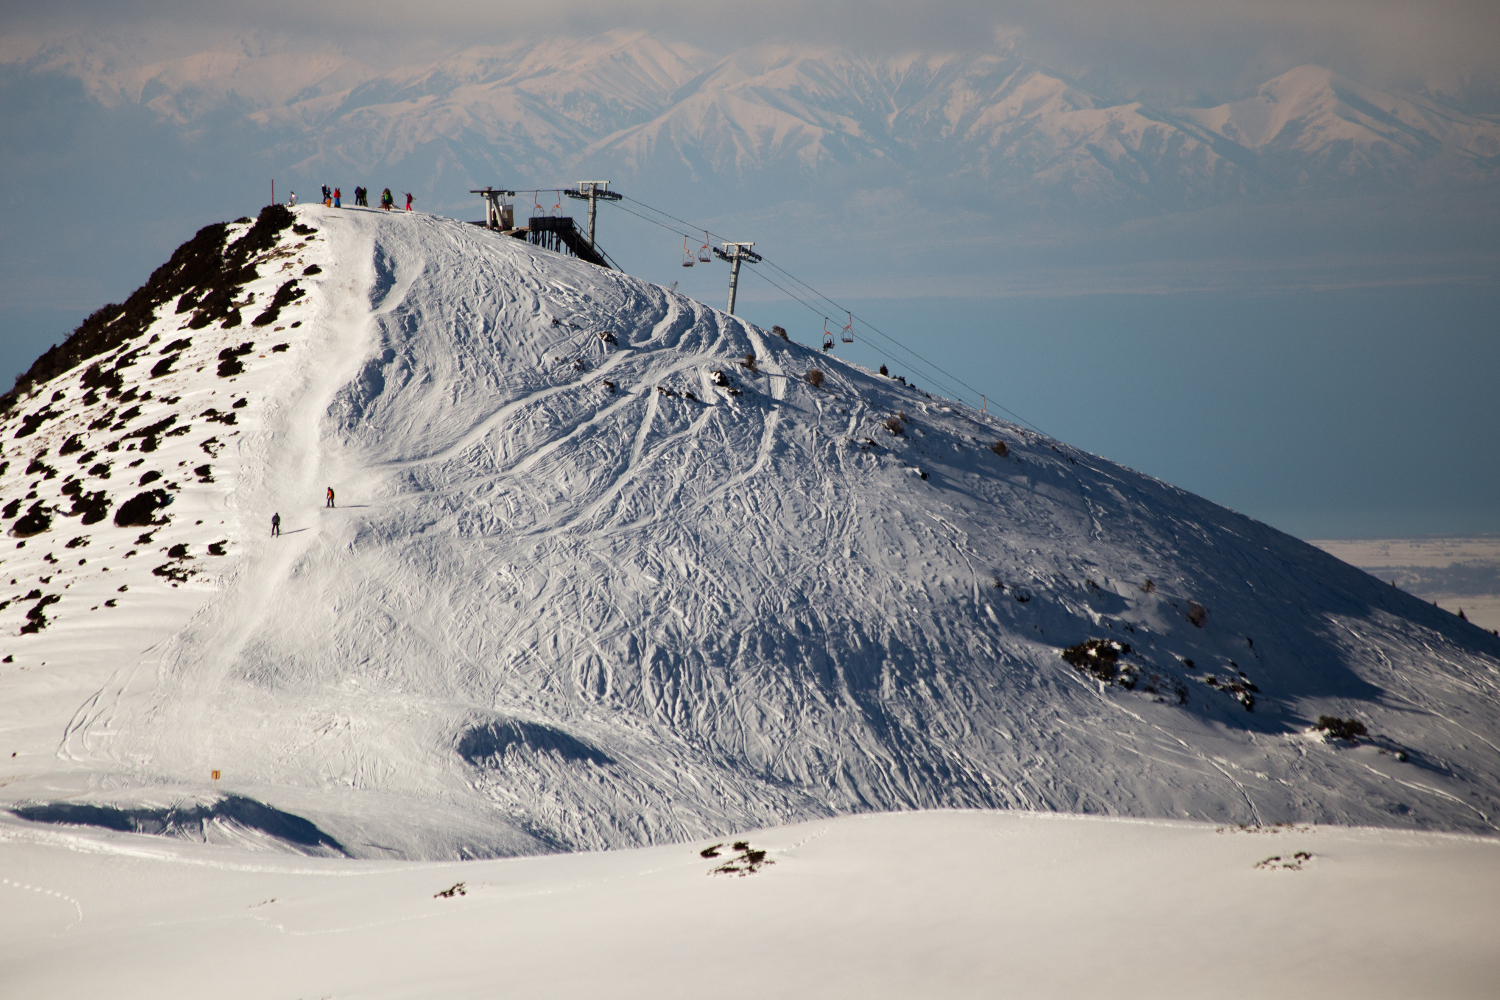 Views of the Tian Shan mountains from Karakol Ski Resort © Stephen Lioy / Lonely Planet